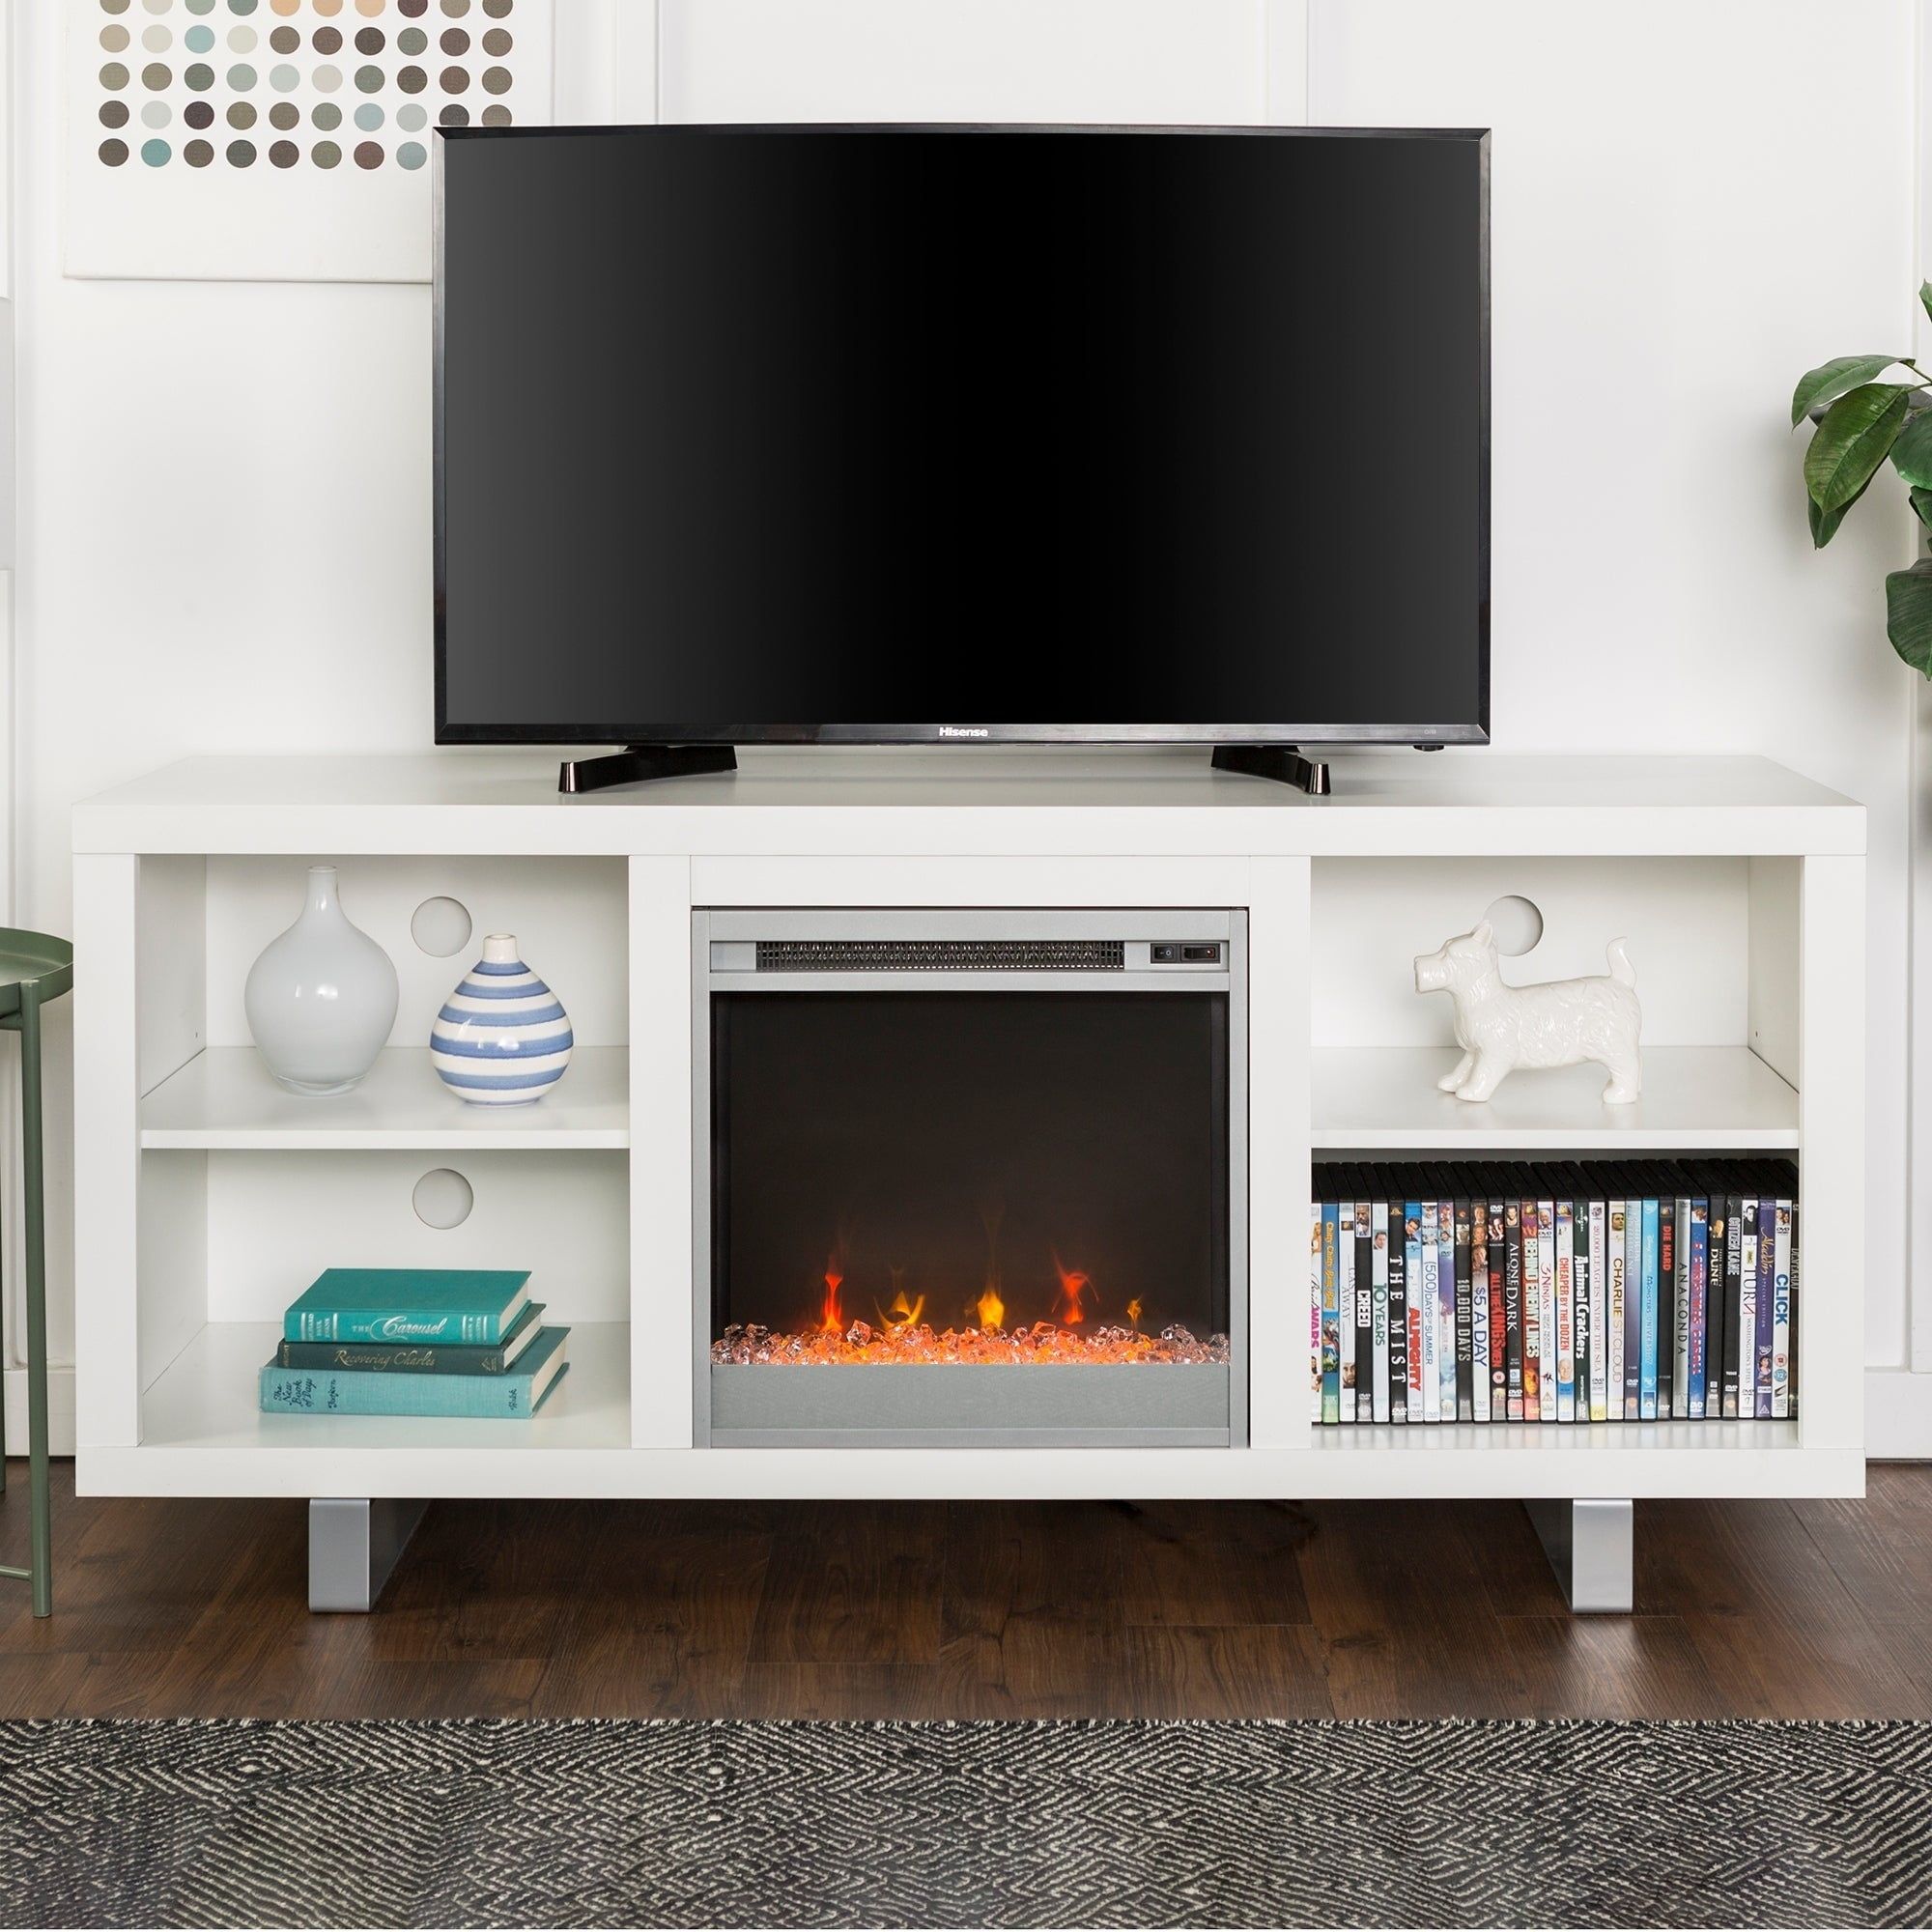 Middlebrook Designs 58" Modern Fireplace Tv Stand Console – Walmart Intended For Modern Fireplace Tv Stands (View 12 of 20)